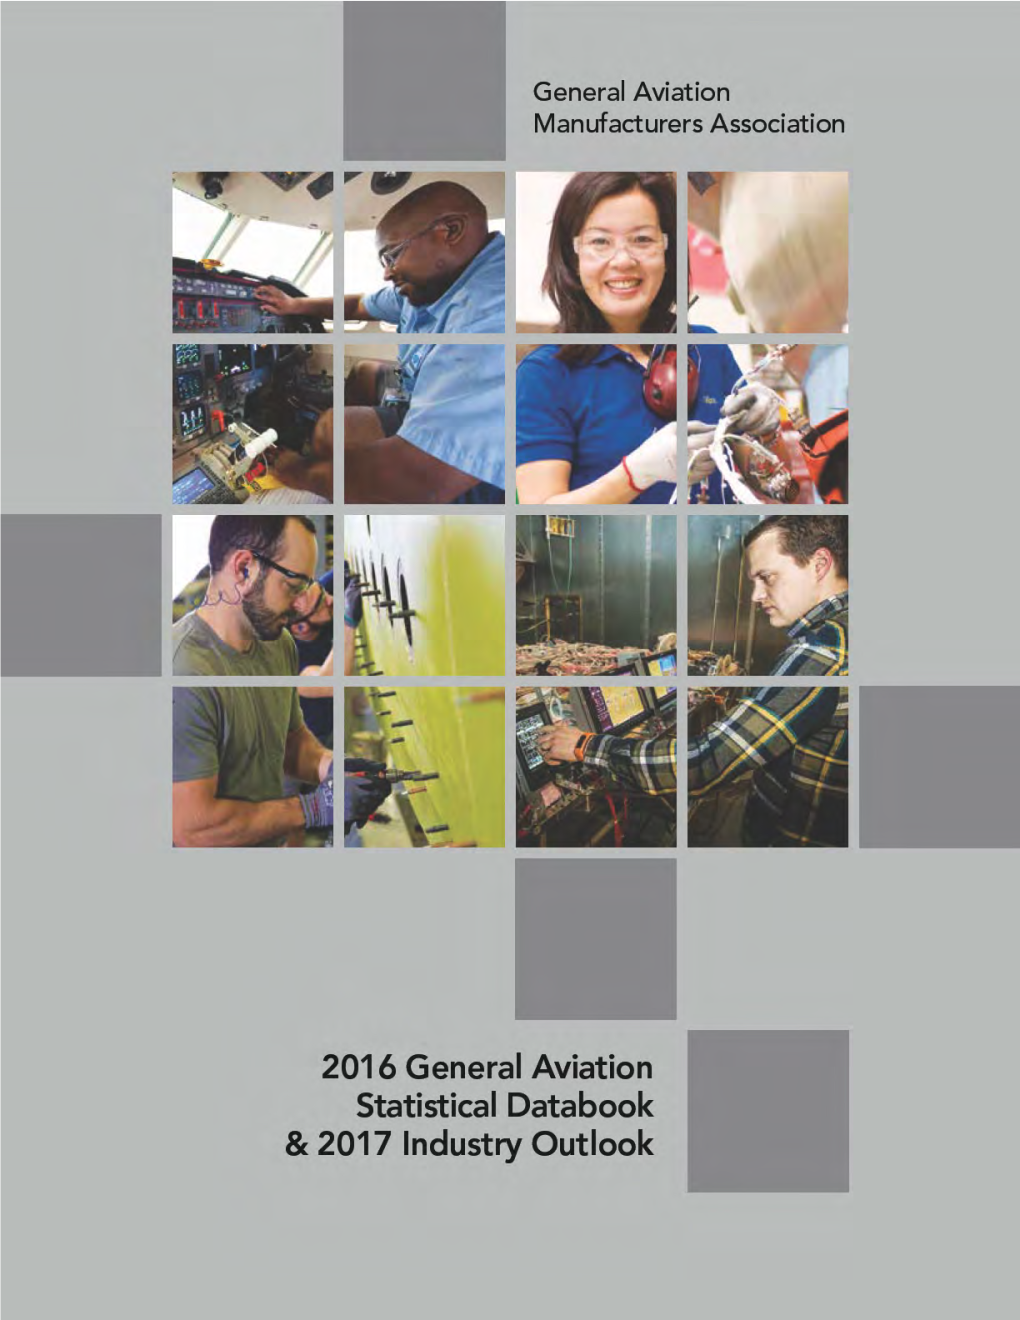 2016 General Aviation Statistical Databook and 2017 Industry Outlook